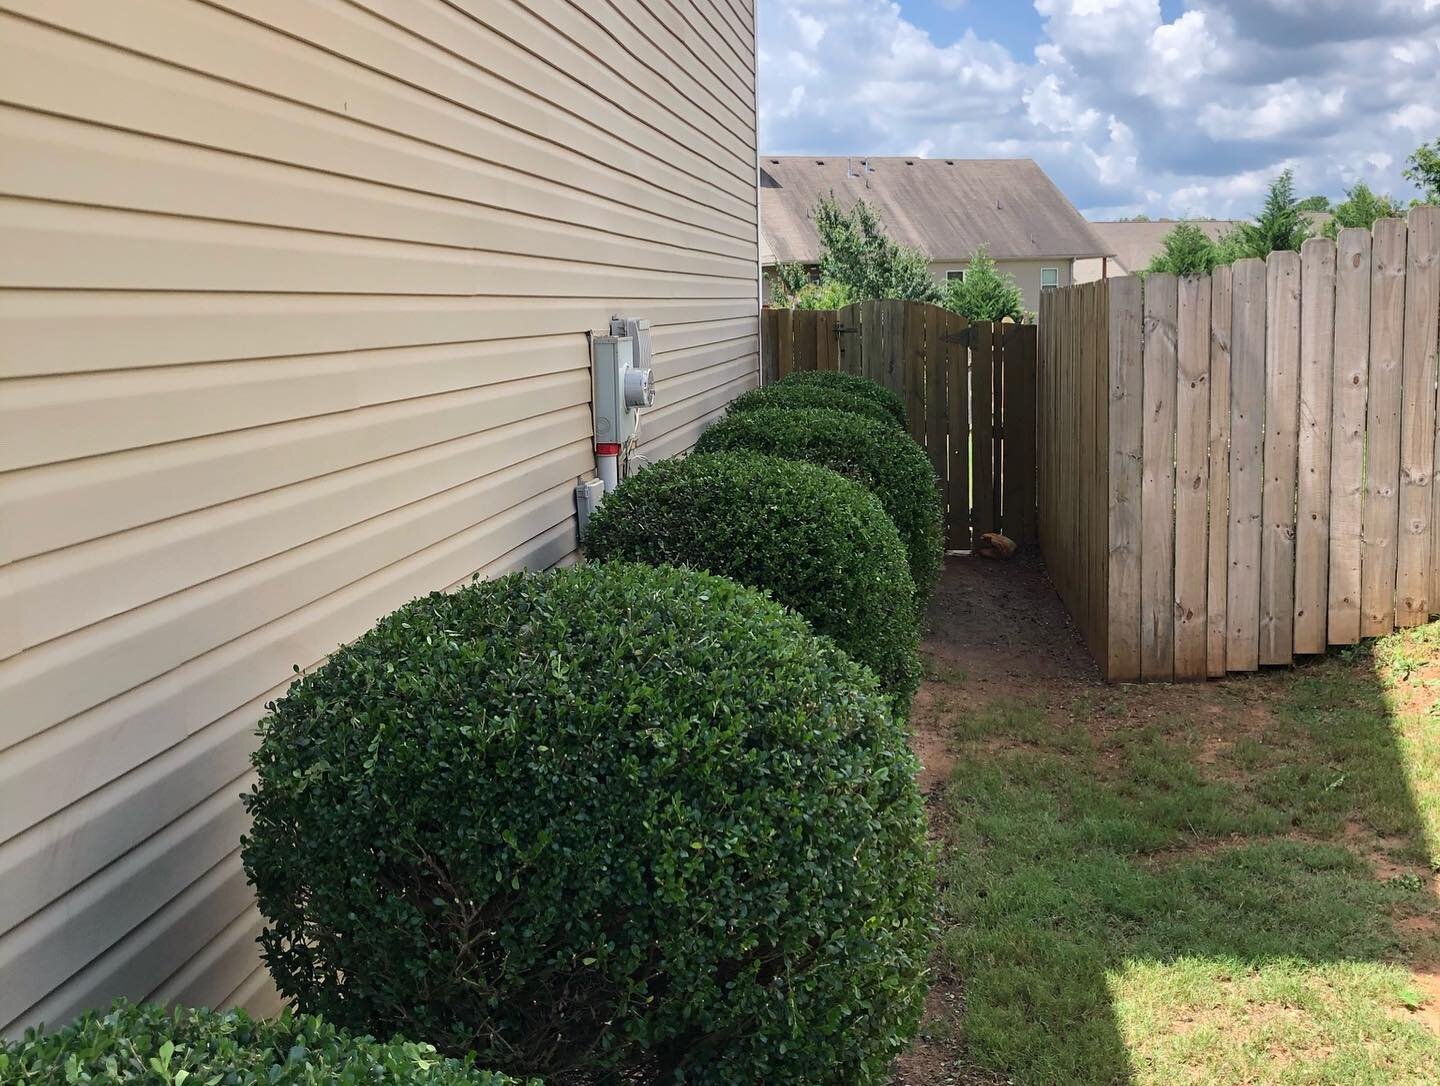 SHRUB TRIM:

Sometimes all that&rsquo;s needed is a little trimming